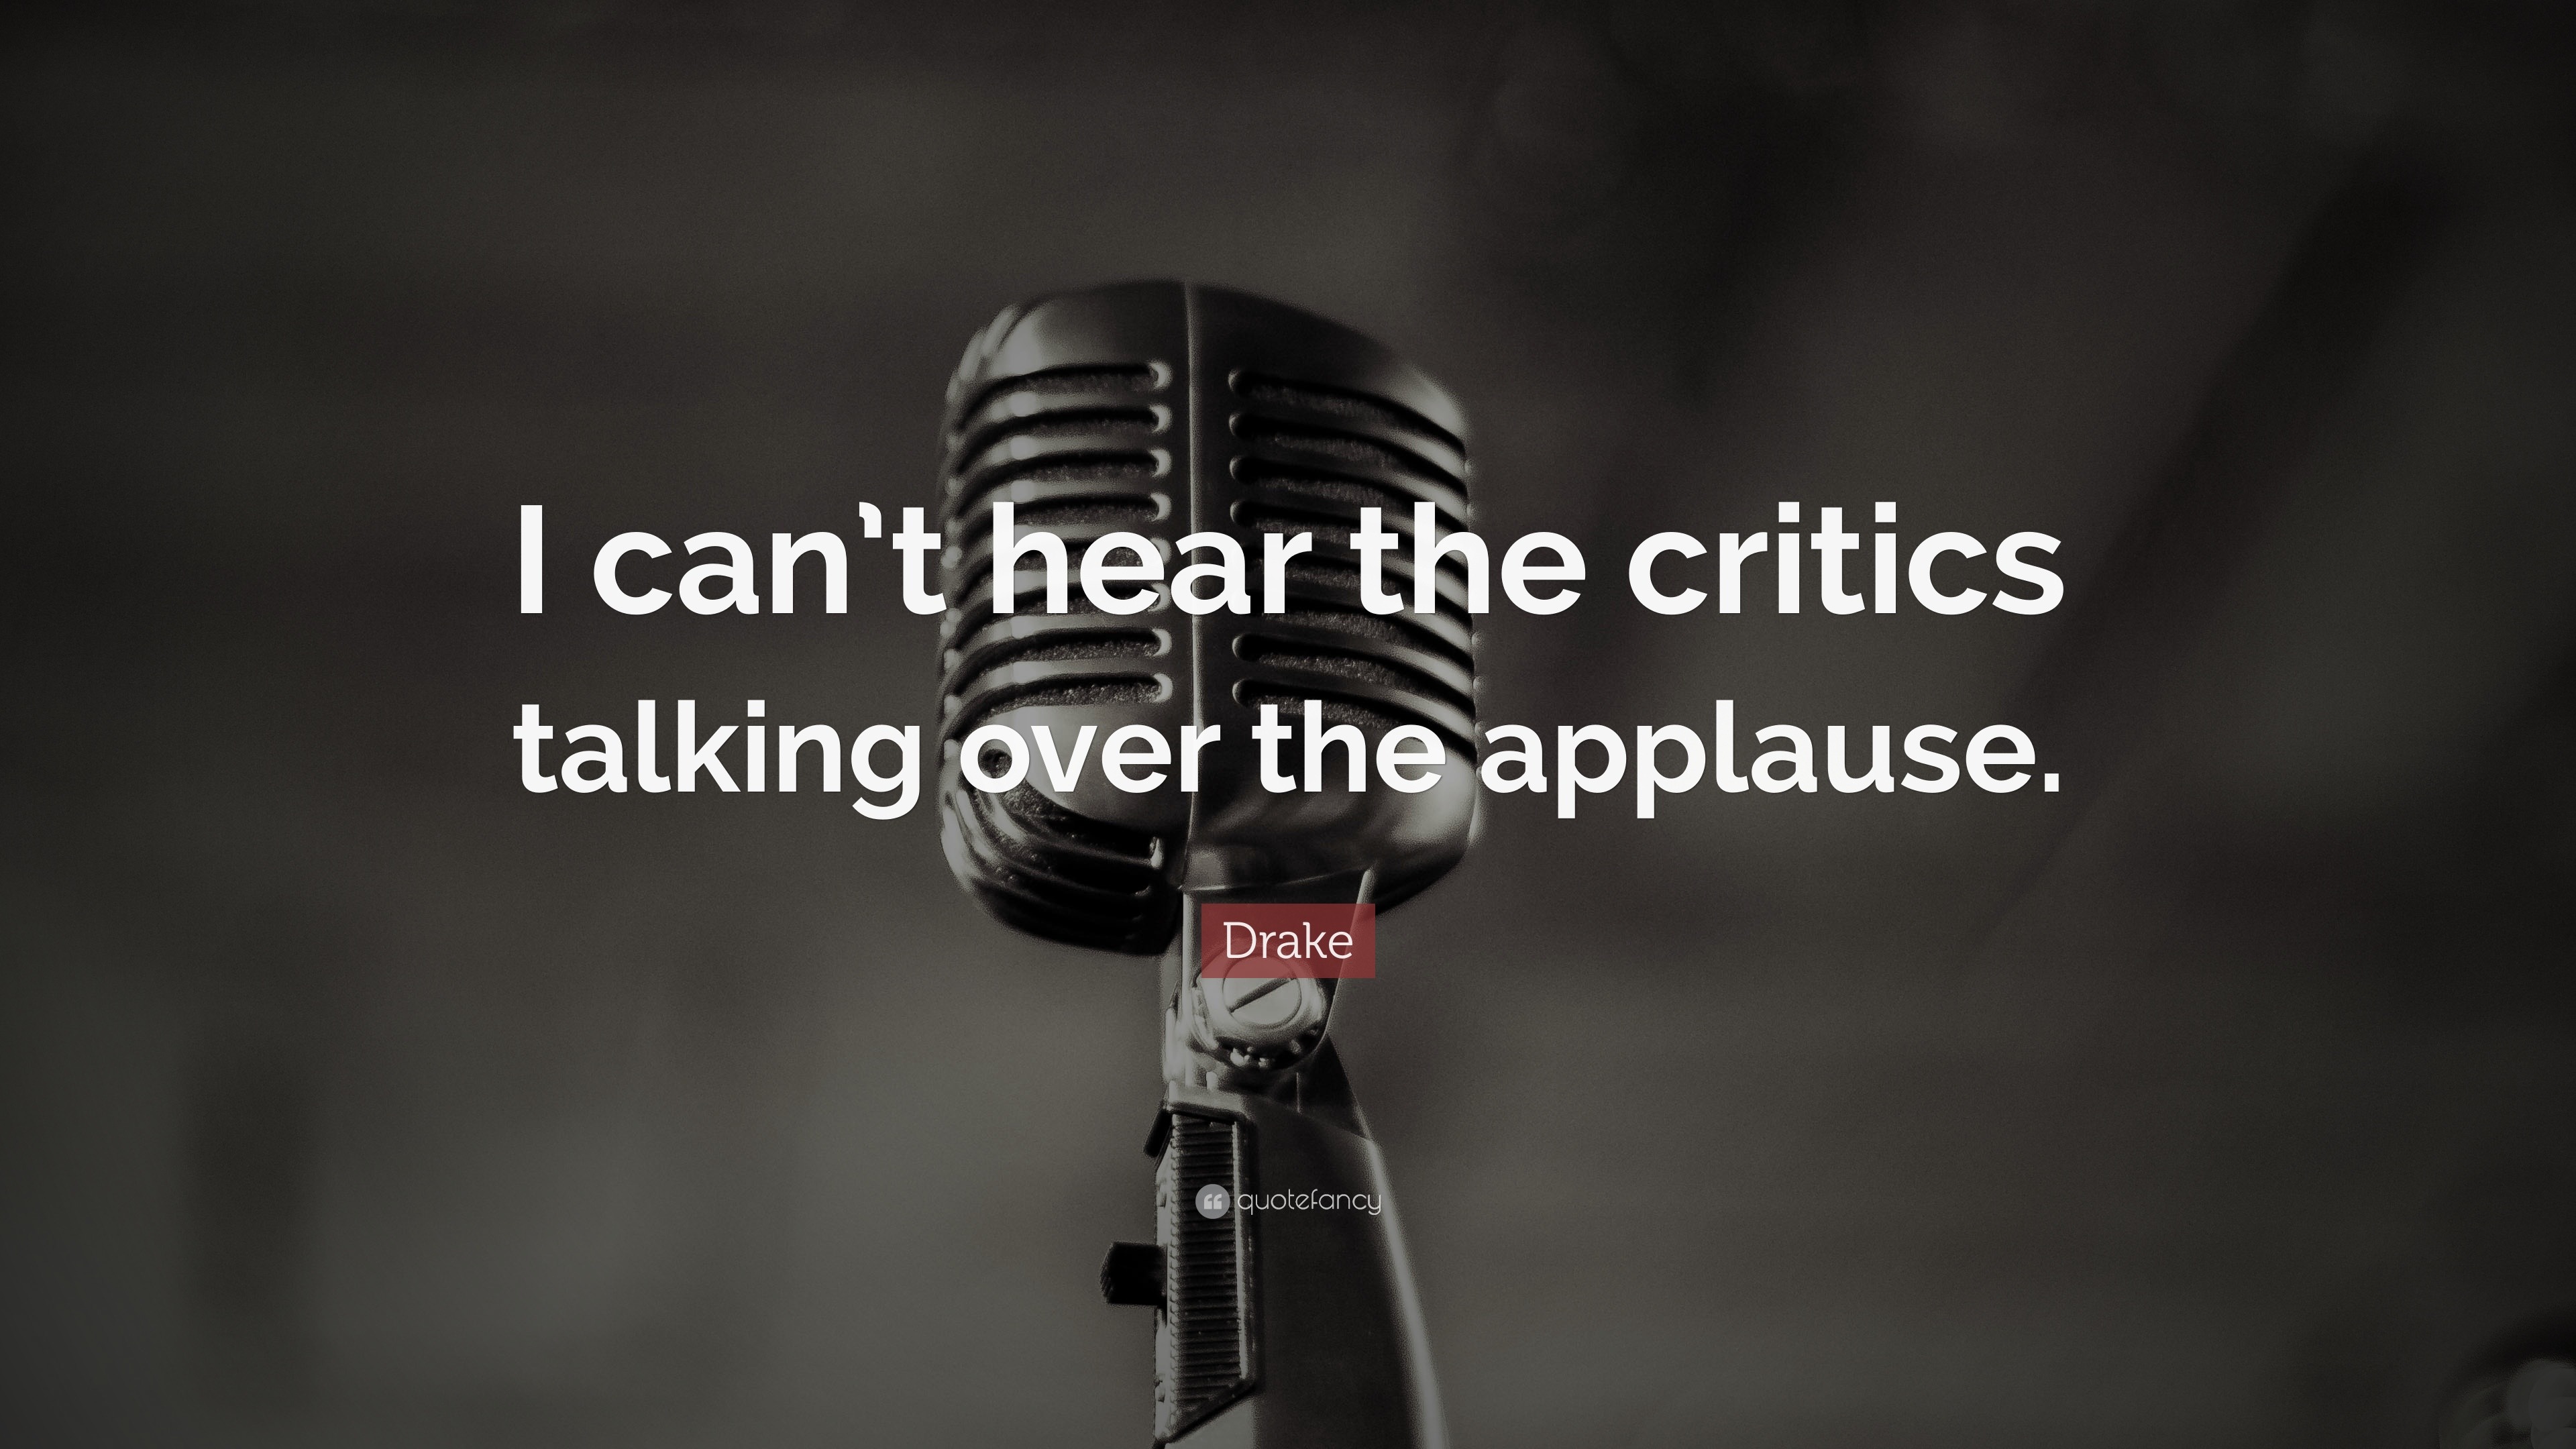 Drake Quote “I can t hear the critics talking over the applause